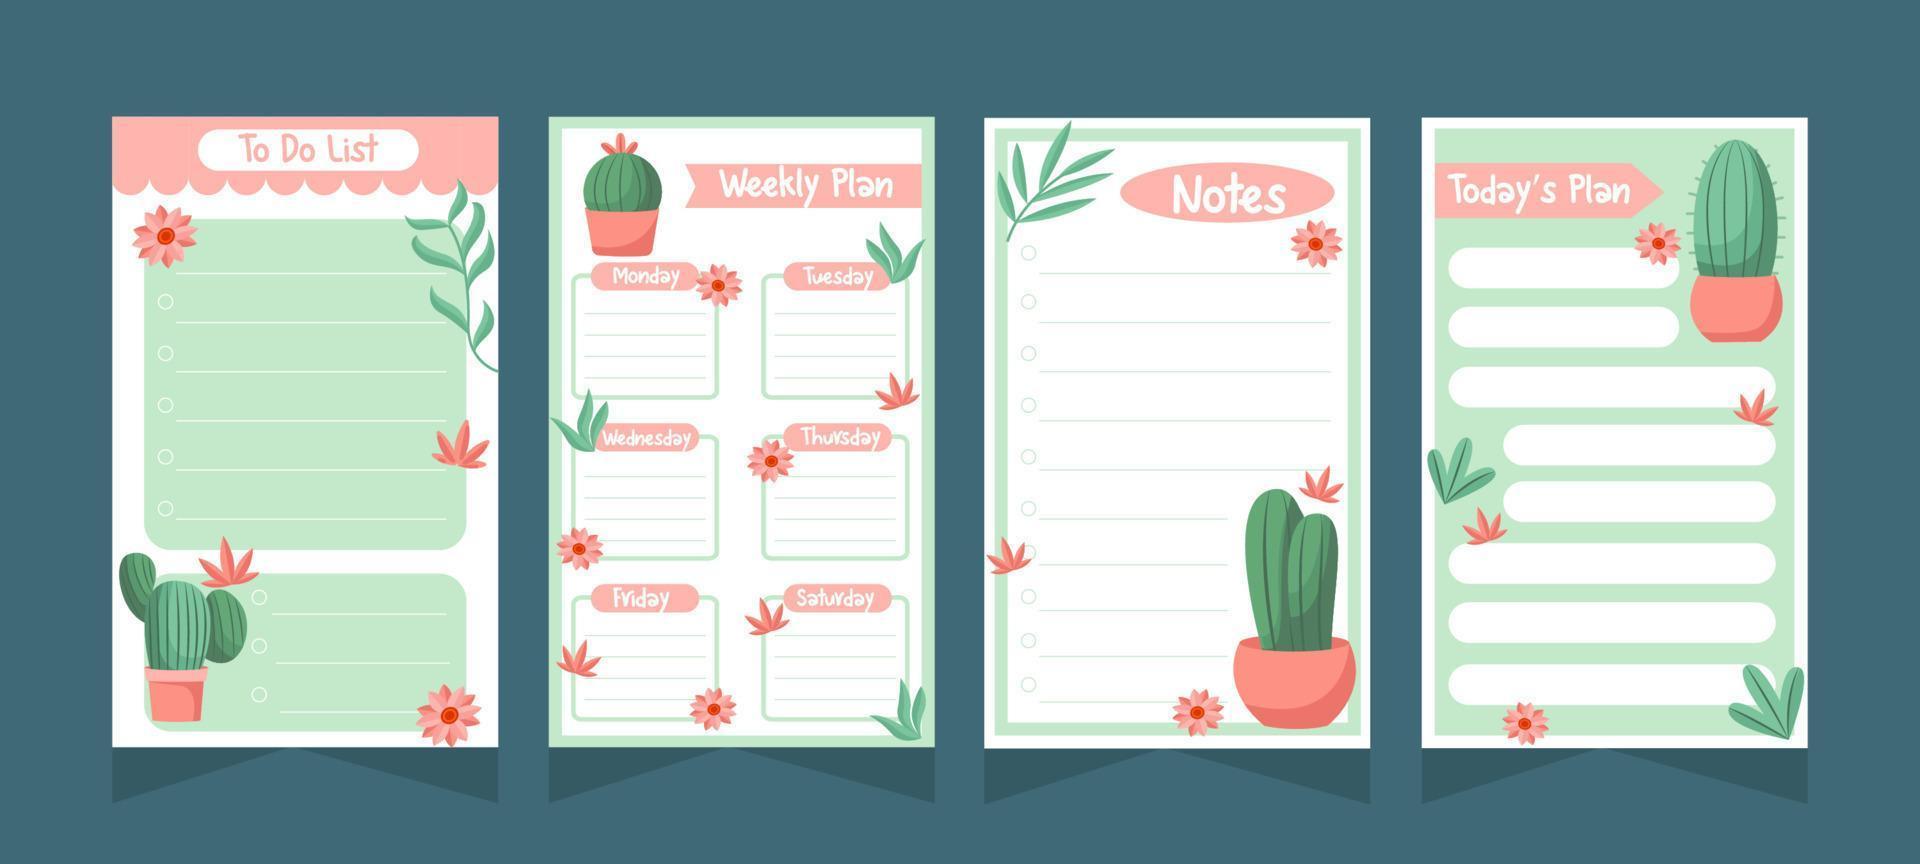 Cactus Themed Journal Templates vector